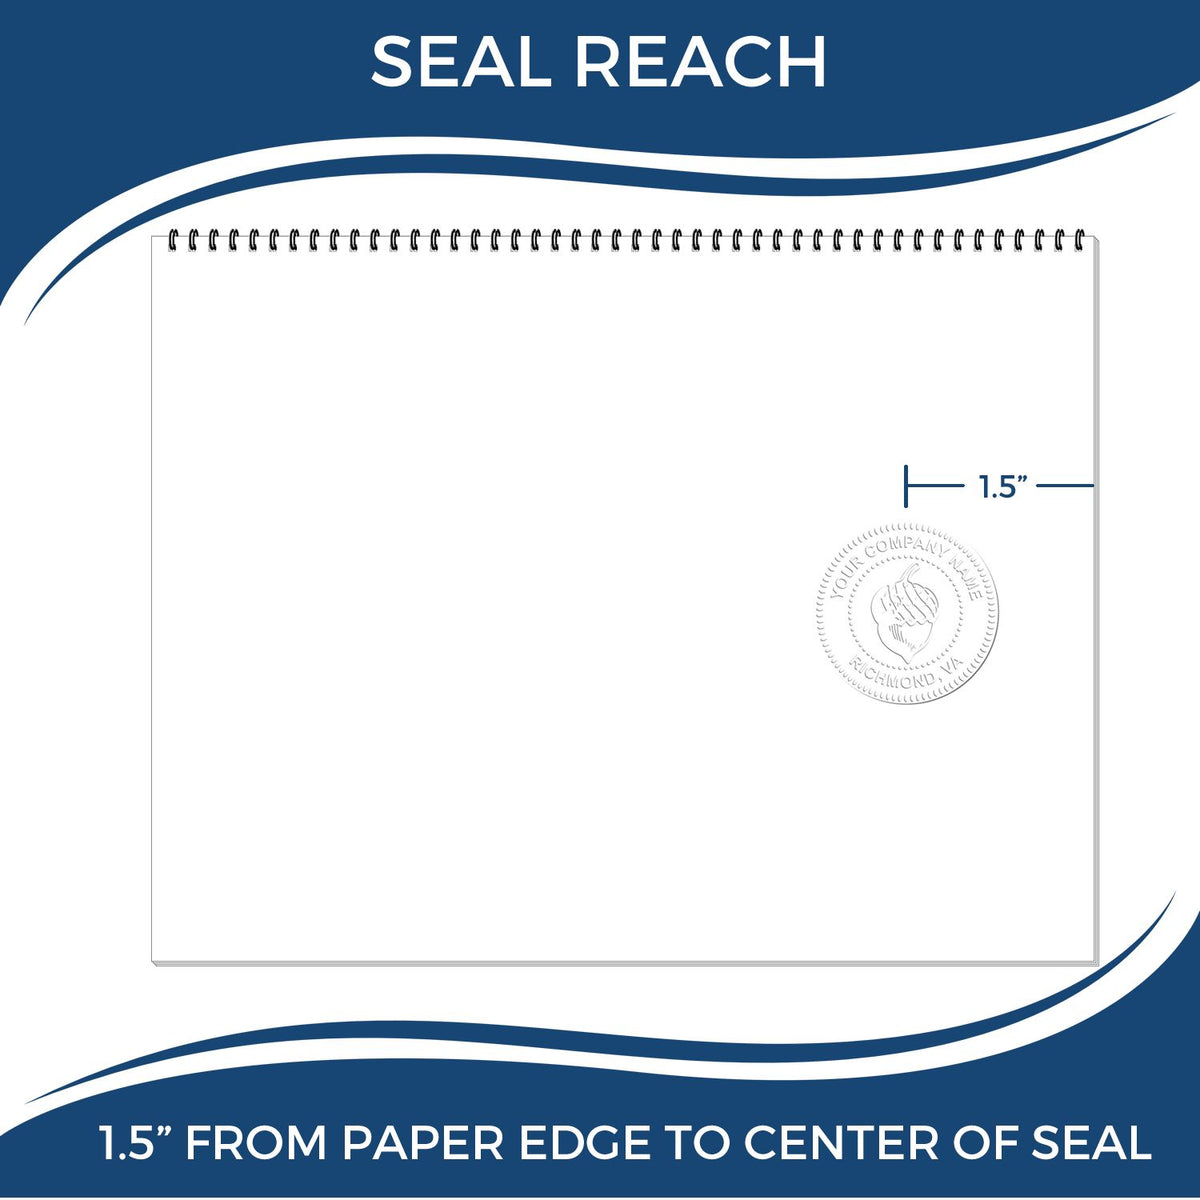 An infographic showing the seal reach which is represented by a ruler and a miniature seal image of the Handheld Indiana Professional Engineer Embosser